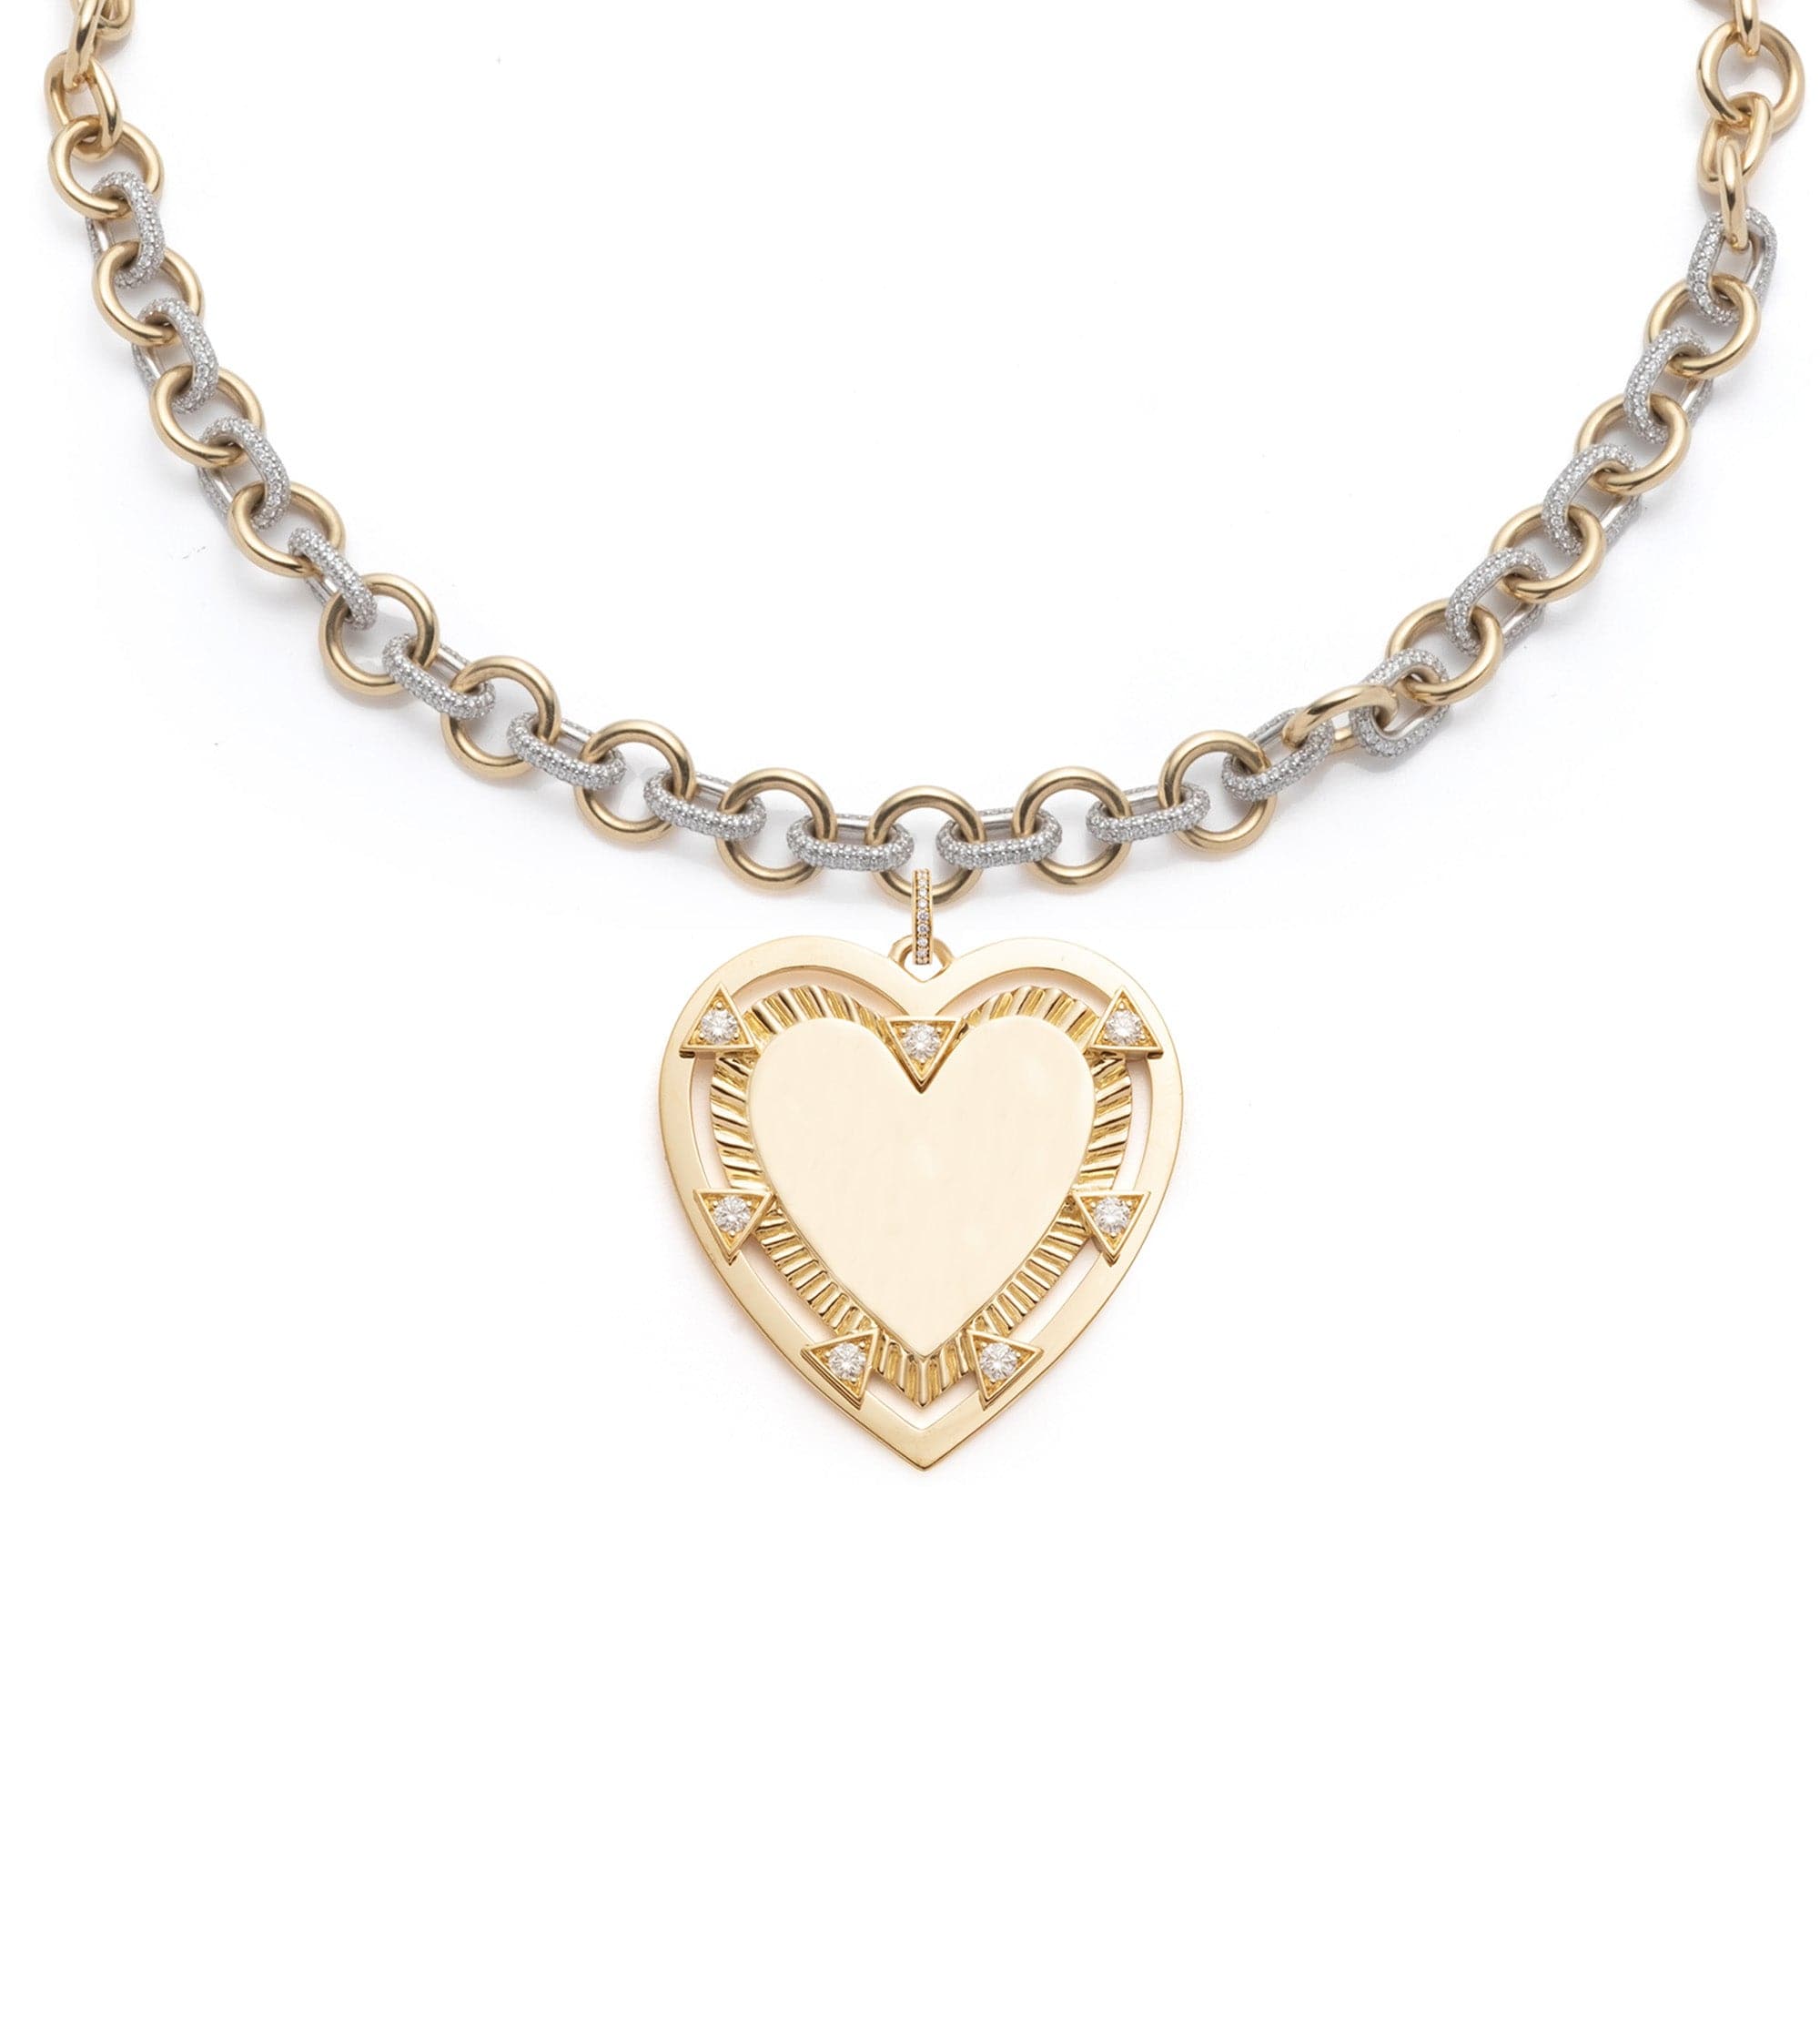 Midsized Mixed Link Pave Chain with Oversized Engravable Heart Medallion and Oval Pushgate